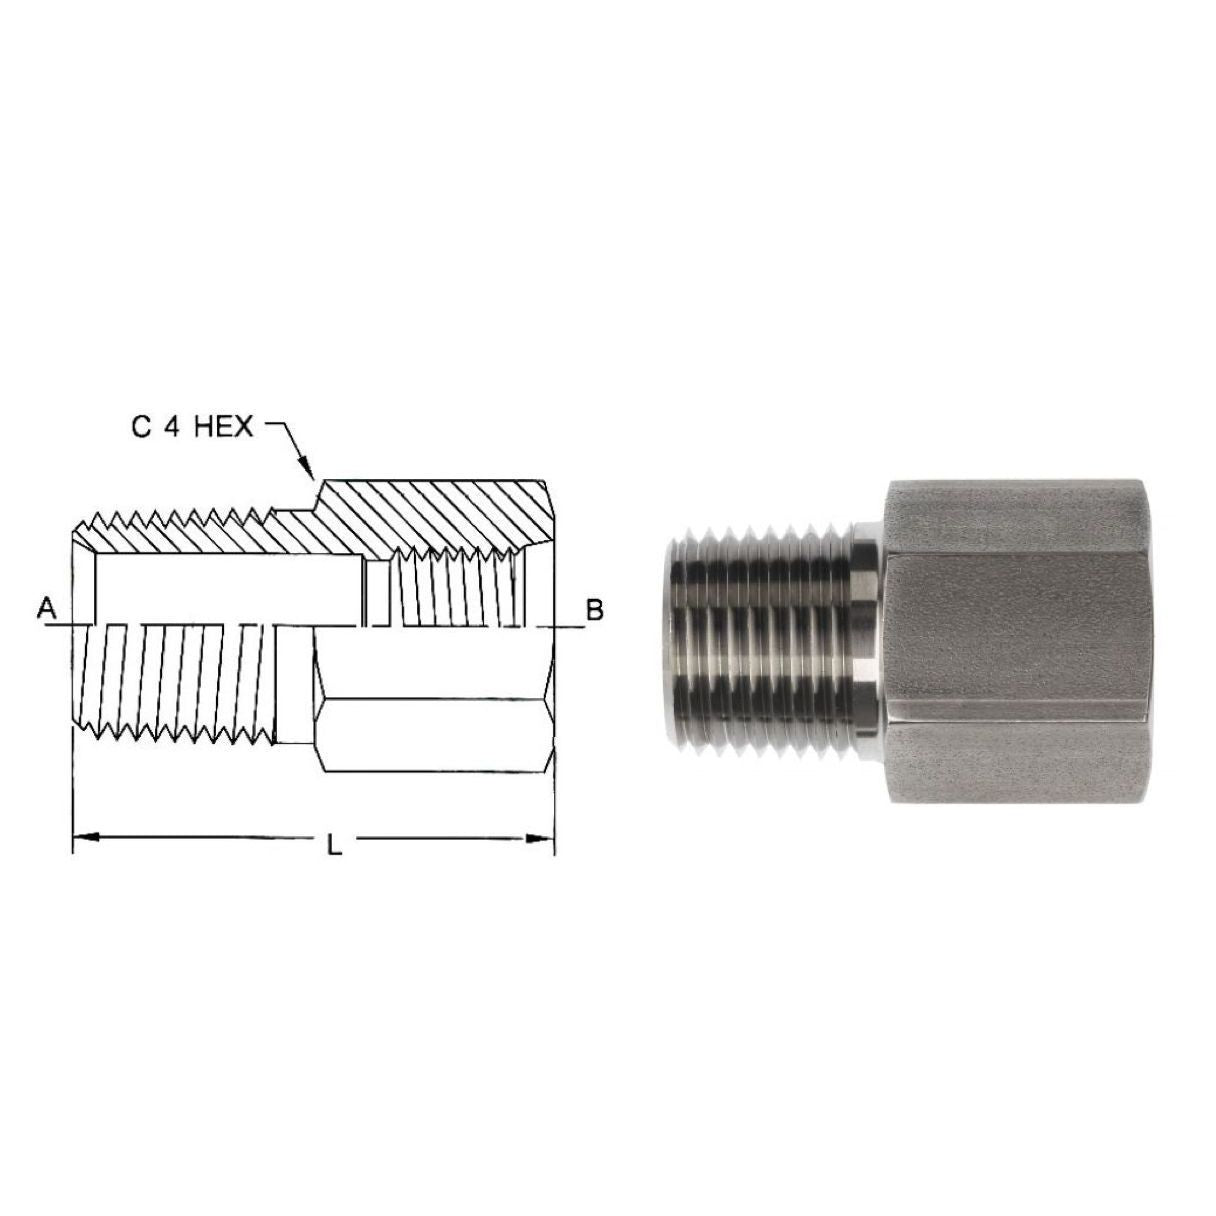 6404-12-12 : OneHydraulics Adapter, Straight, 0.75 (3/4") Female ORB x 0.75 (3/4") Male, Steel, 5500psi